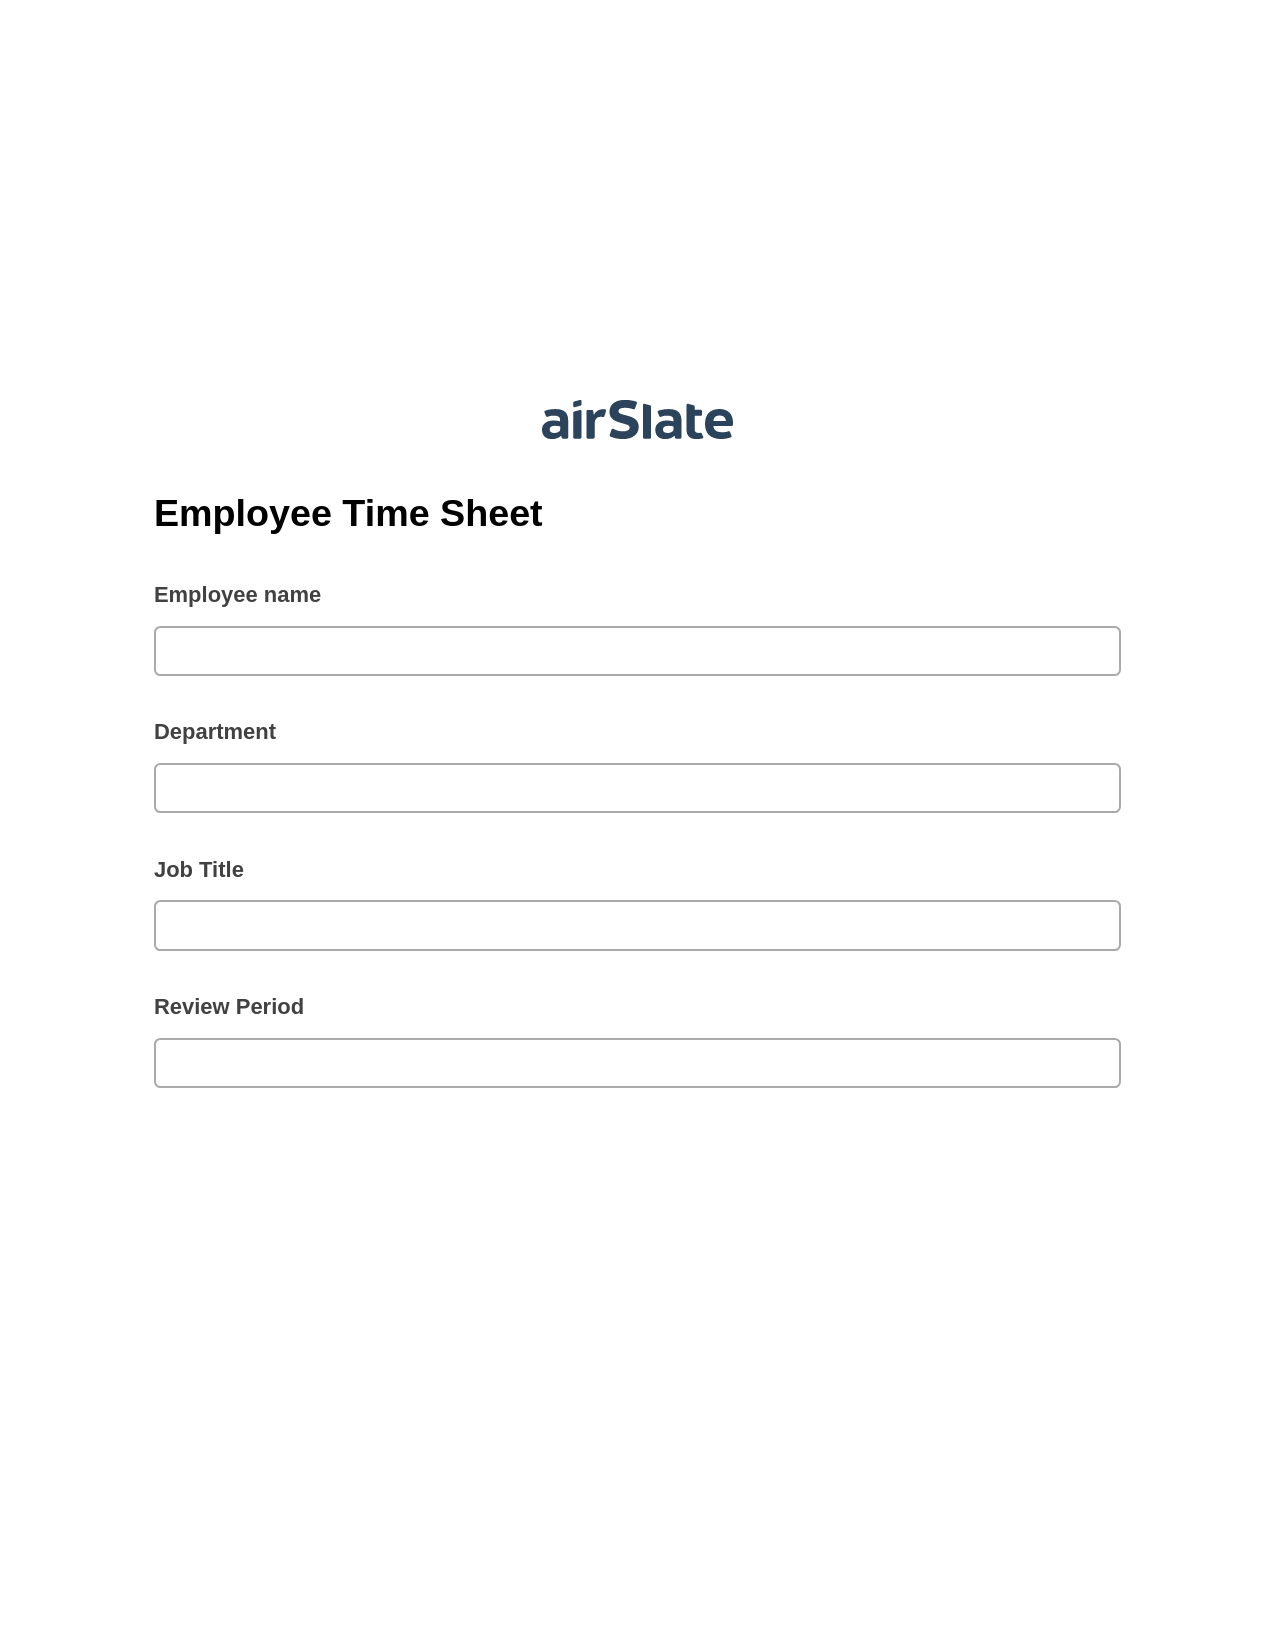 Multirole Employee Time Sheet Pre-fill Dropdowns from Excel Bot, Create Salesforce Records Bot, Export to Salesforce Record Bot